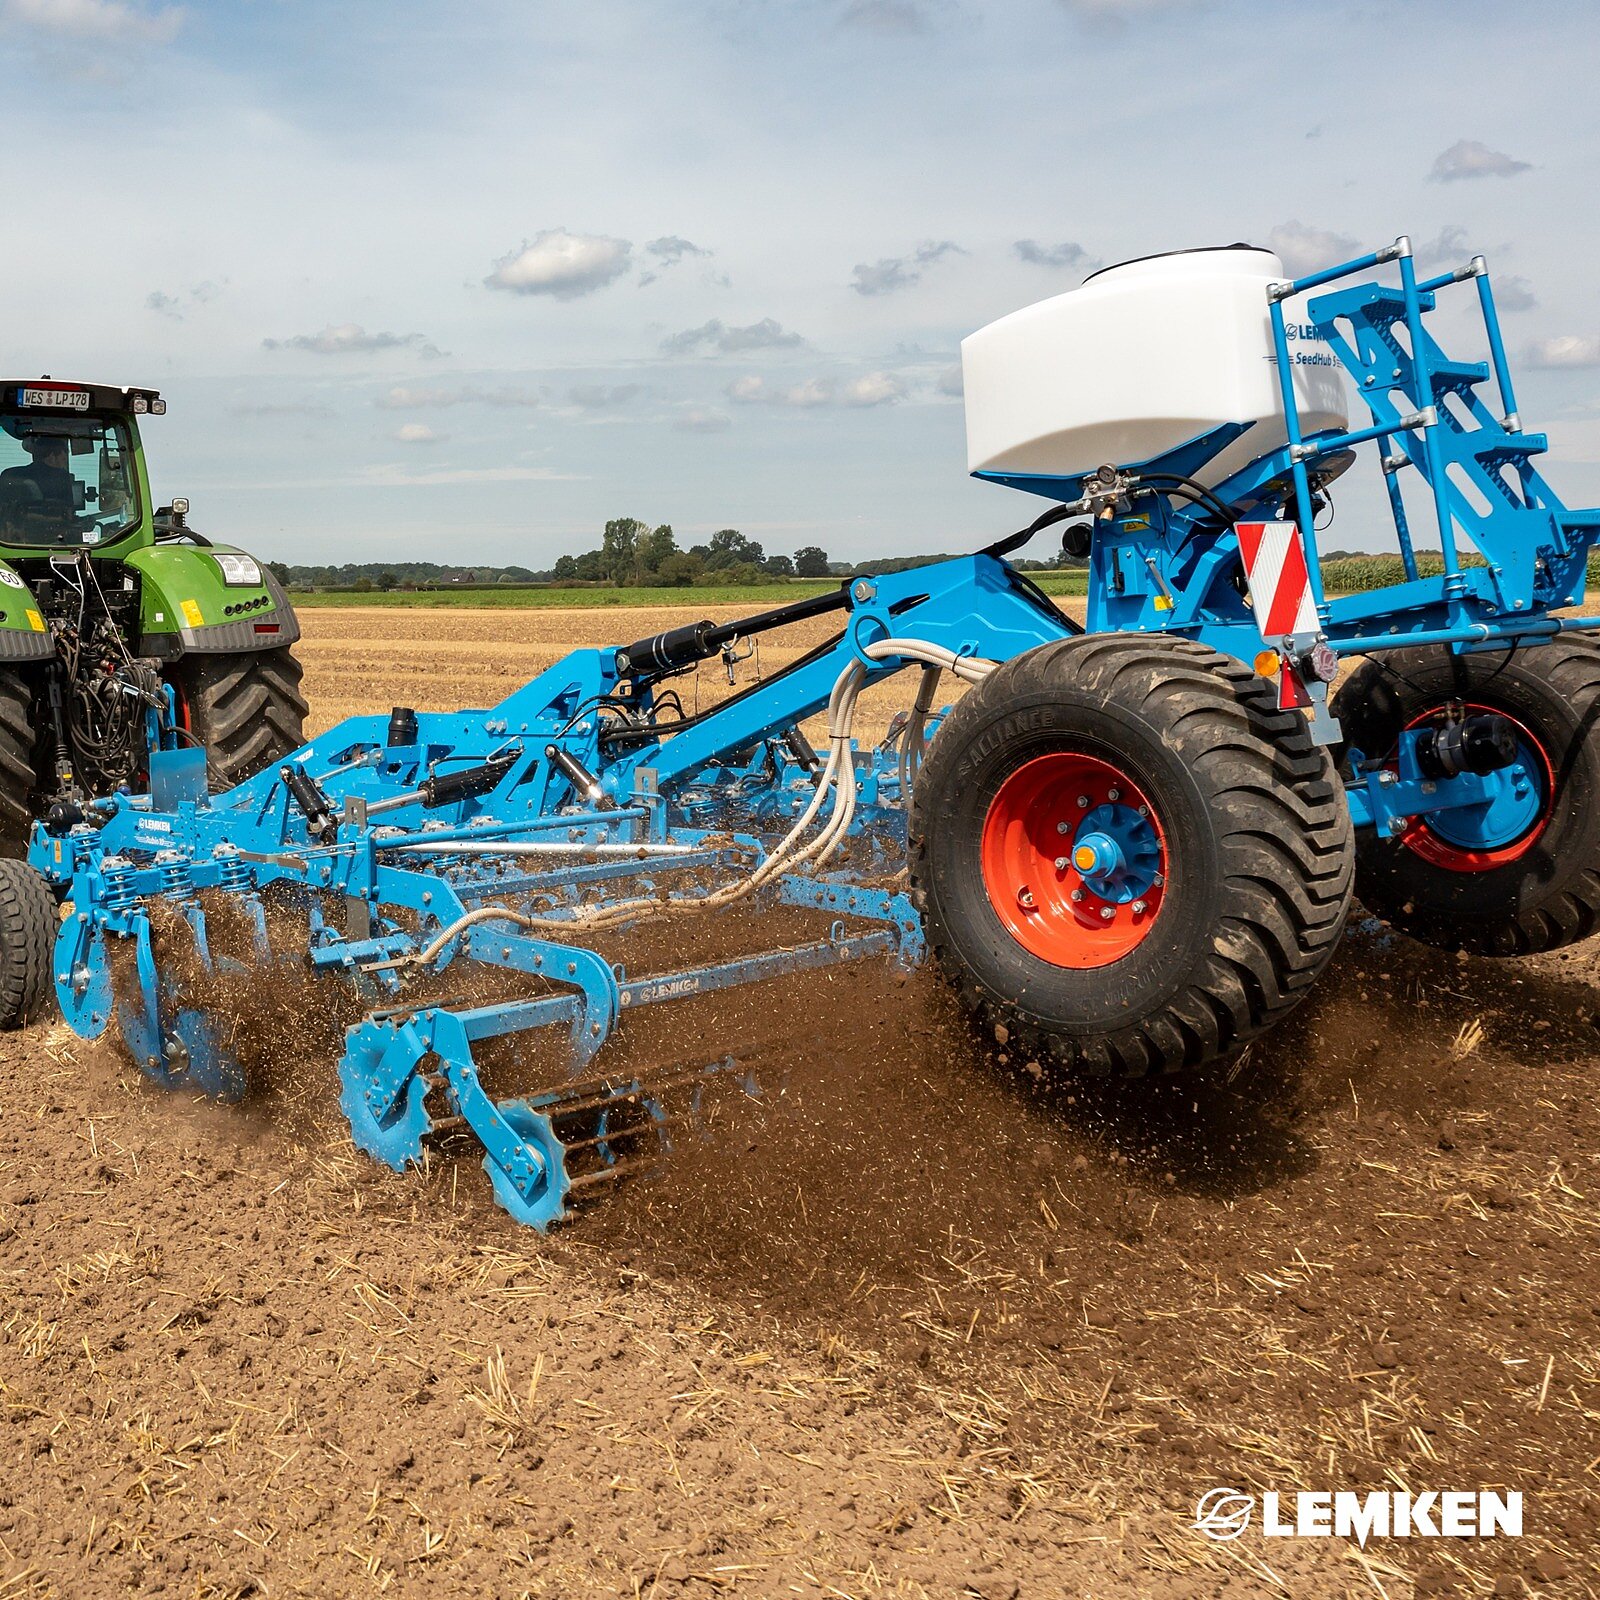 Conquer Soil Challenges with the Rubin10 & the Seed Hub💙
Experience stubble cultivation and cover crop sowing at the...